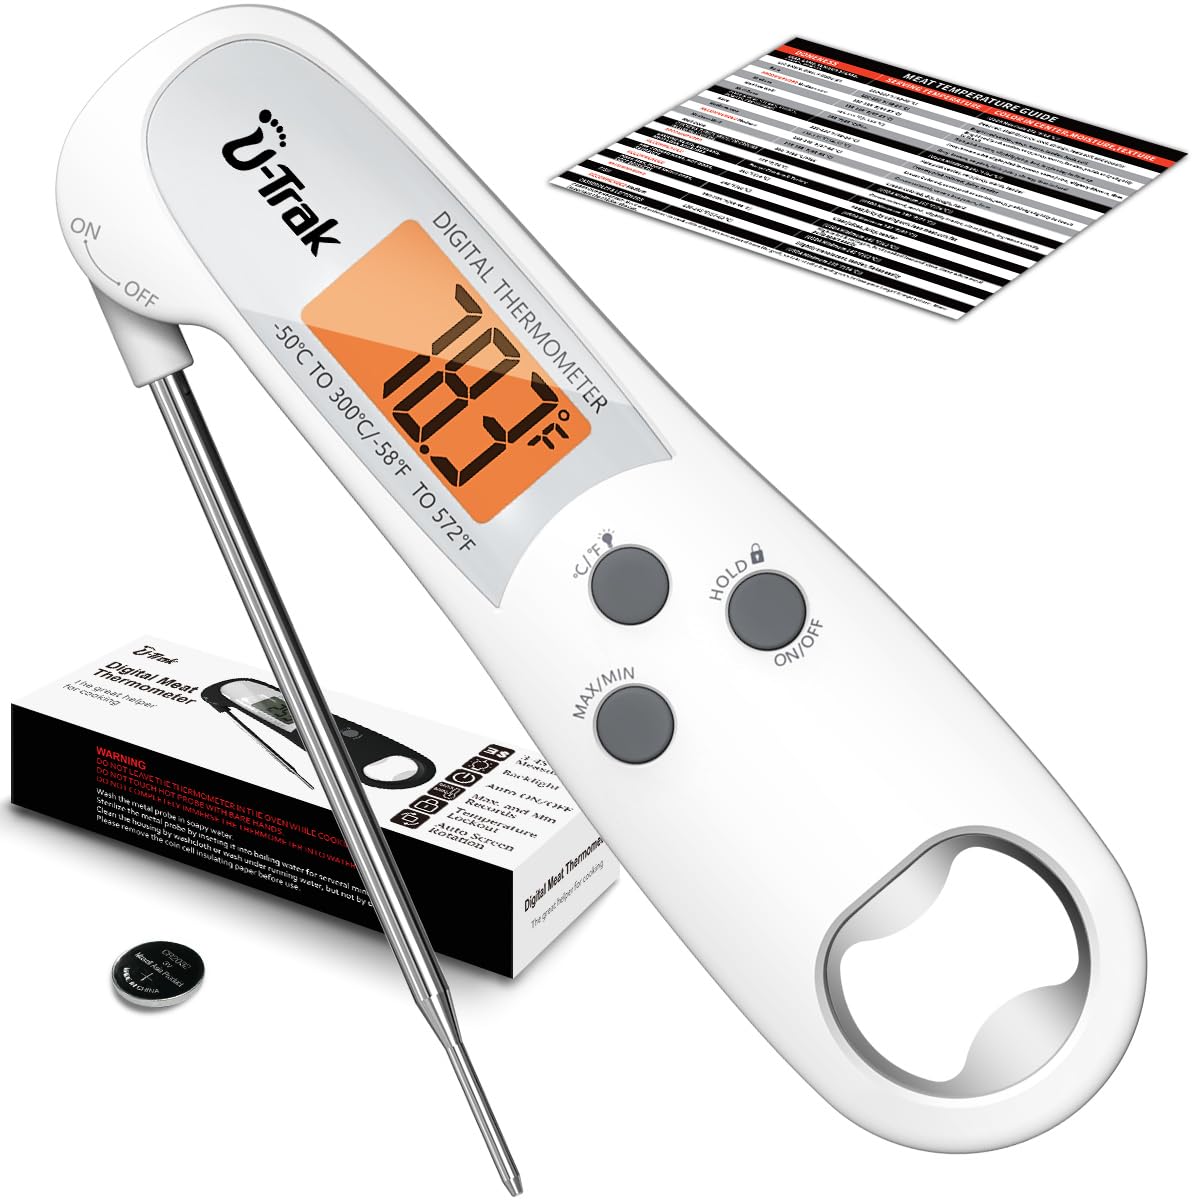 U-Trak Instant Read Meat Thermometer with Backlight for Grill and Cooking, Digital Meat Probe Food Thermometer for BBQ, Liquids, Candy and Oil Deep Frying, Durable Waterproof Grill Thermometer (White)